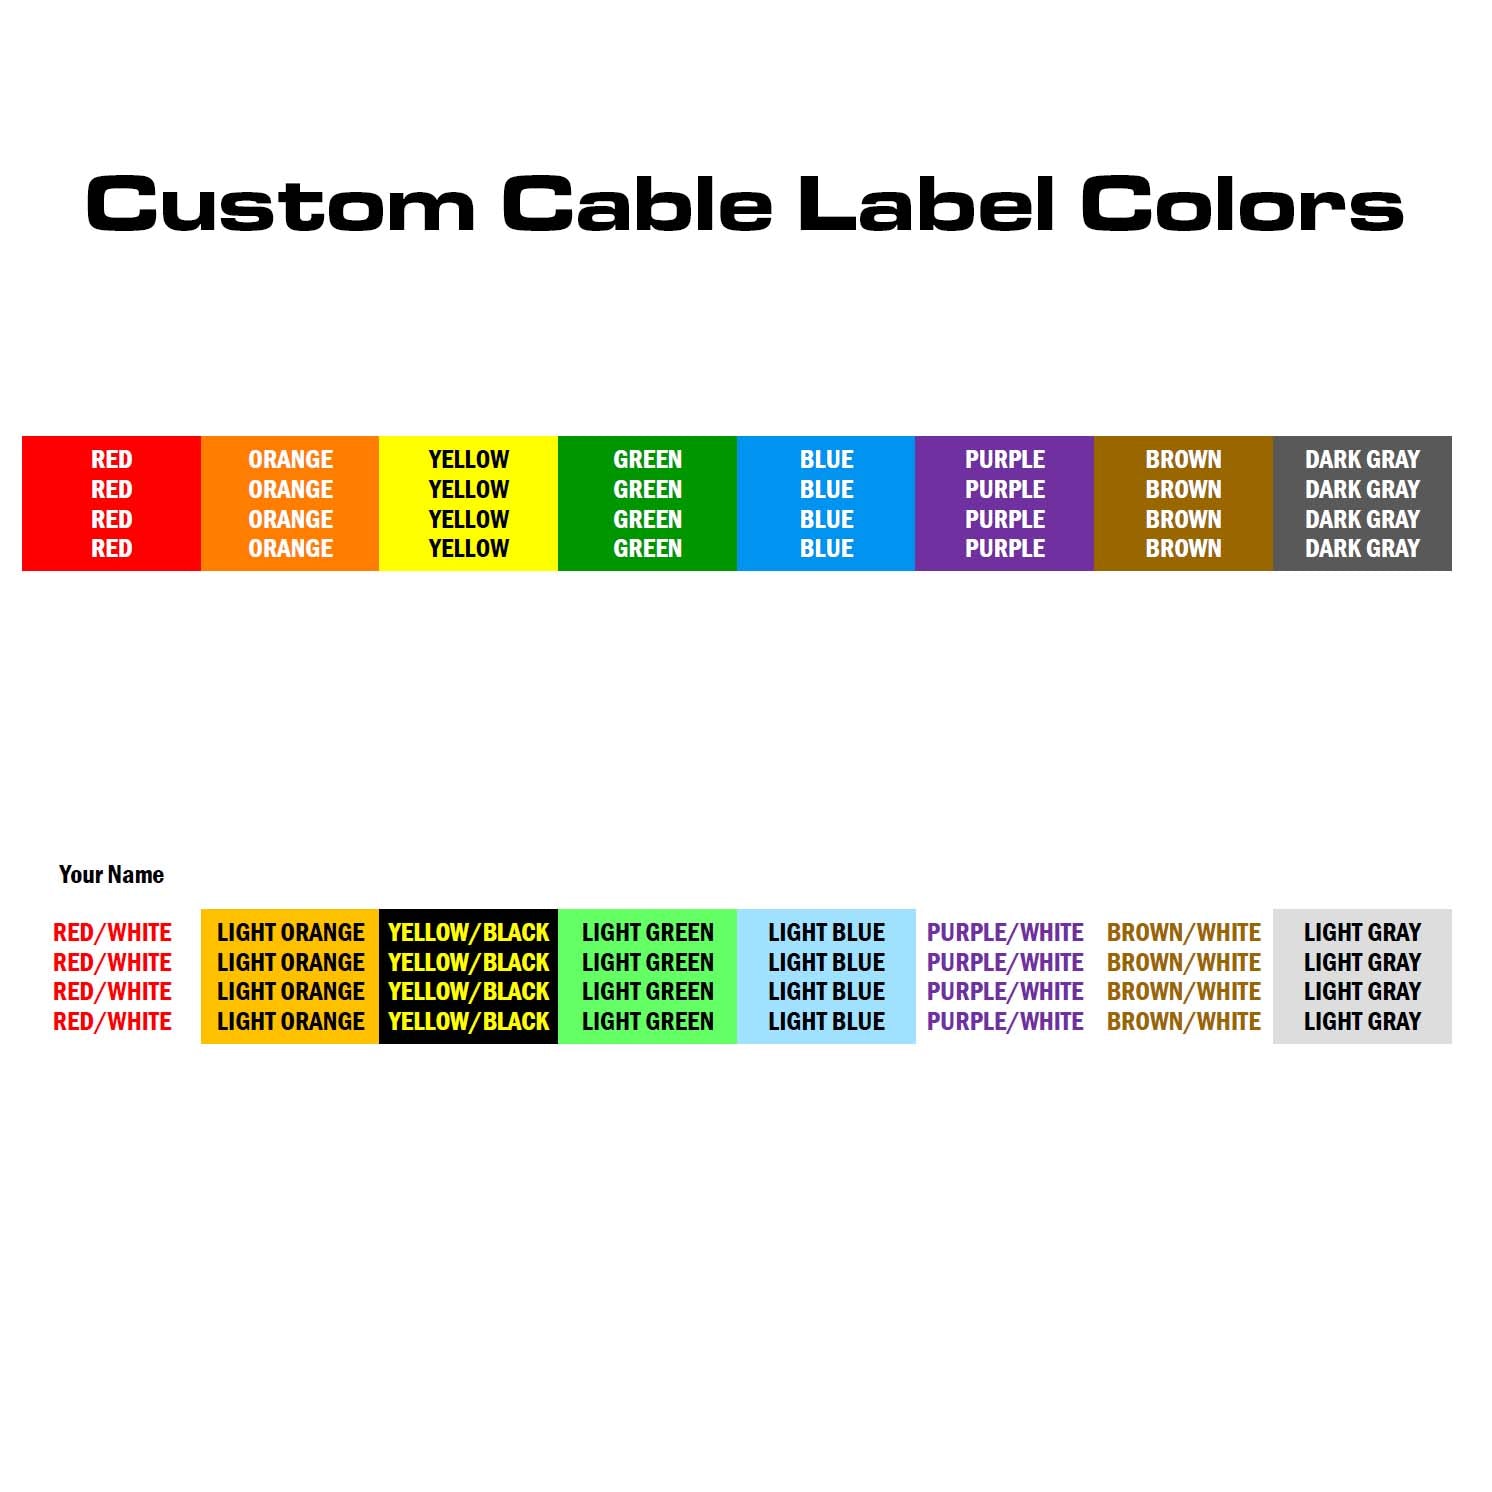 Custom Cable Label Color Options